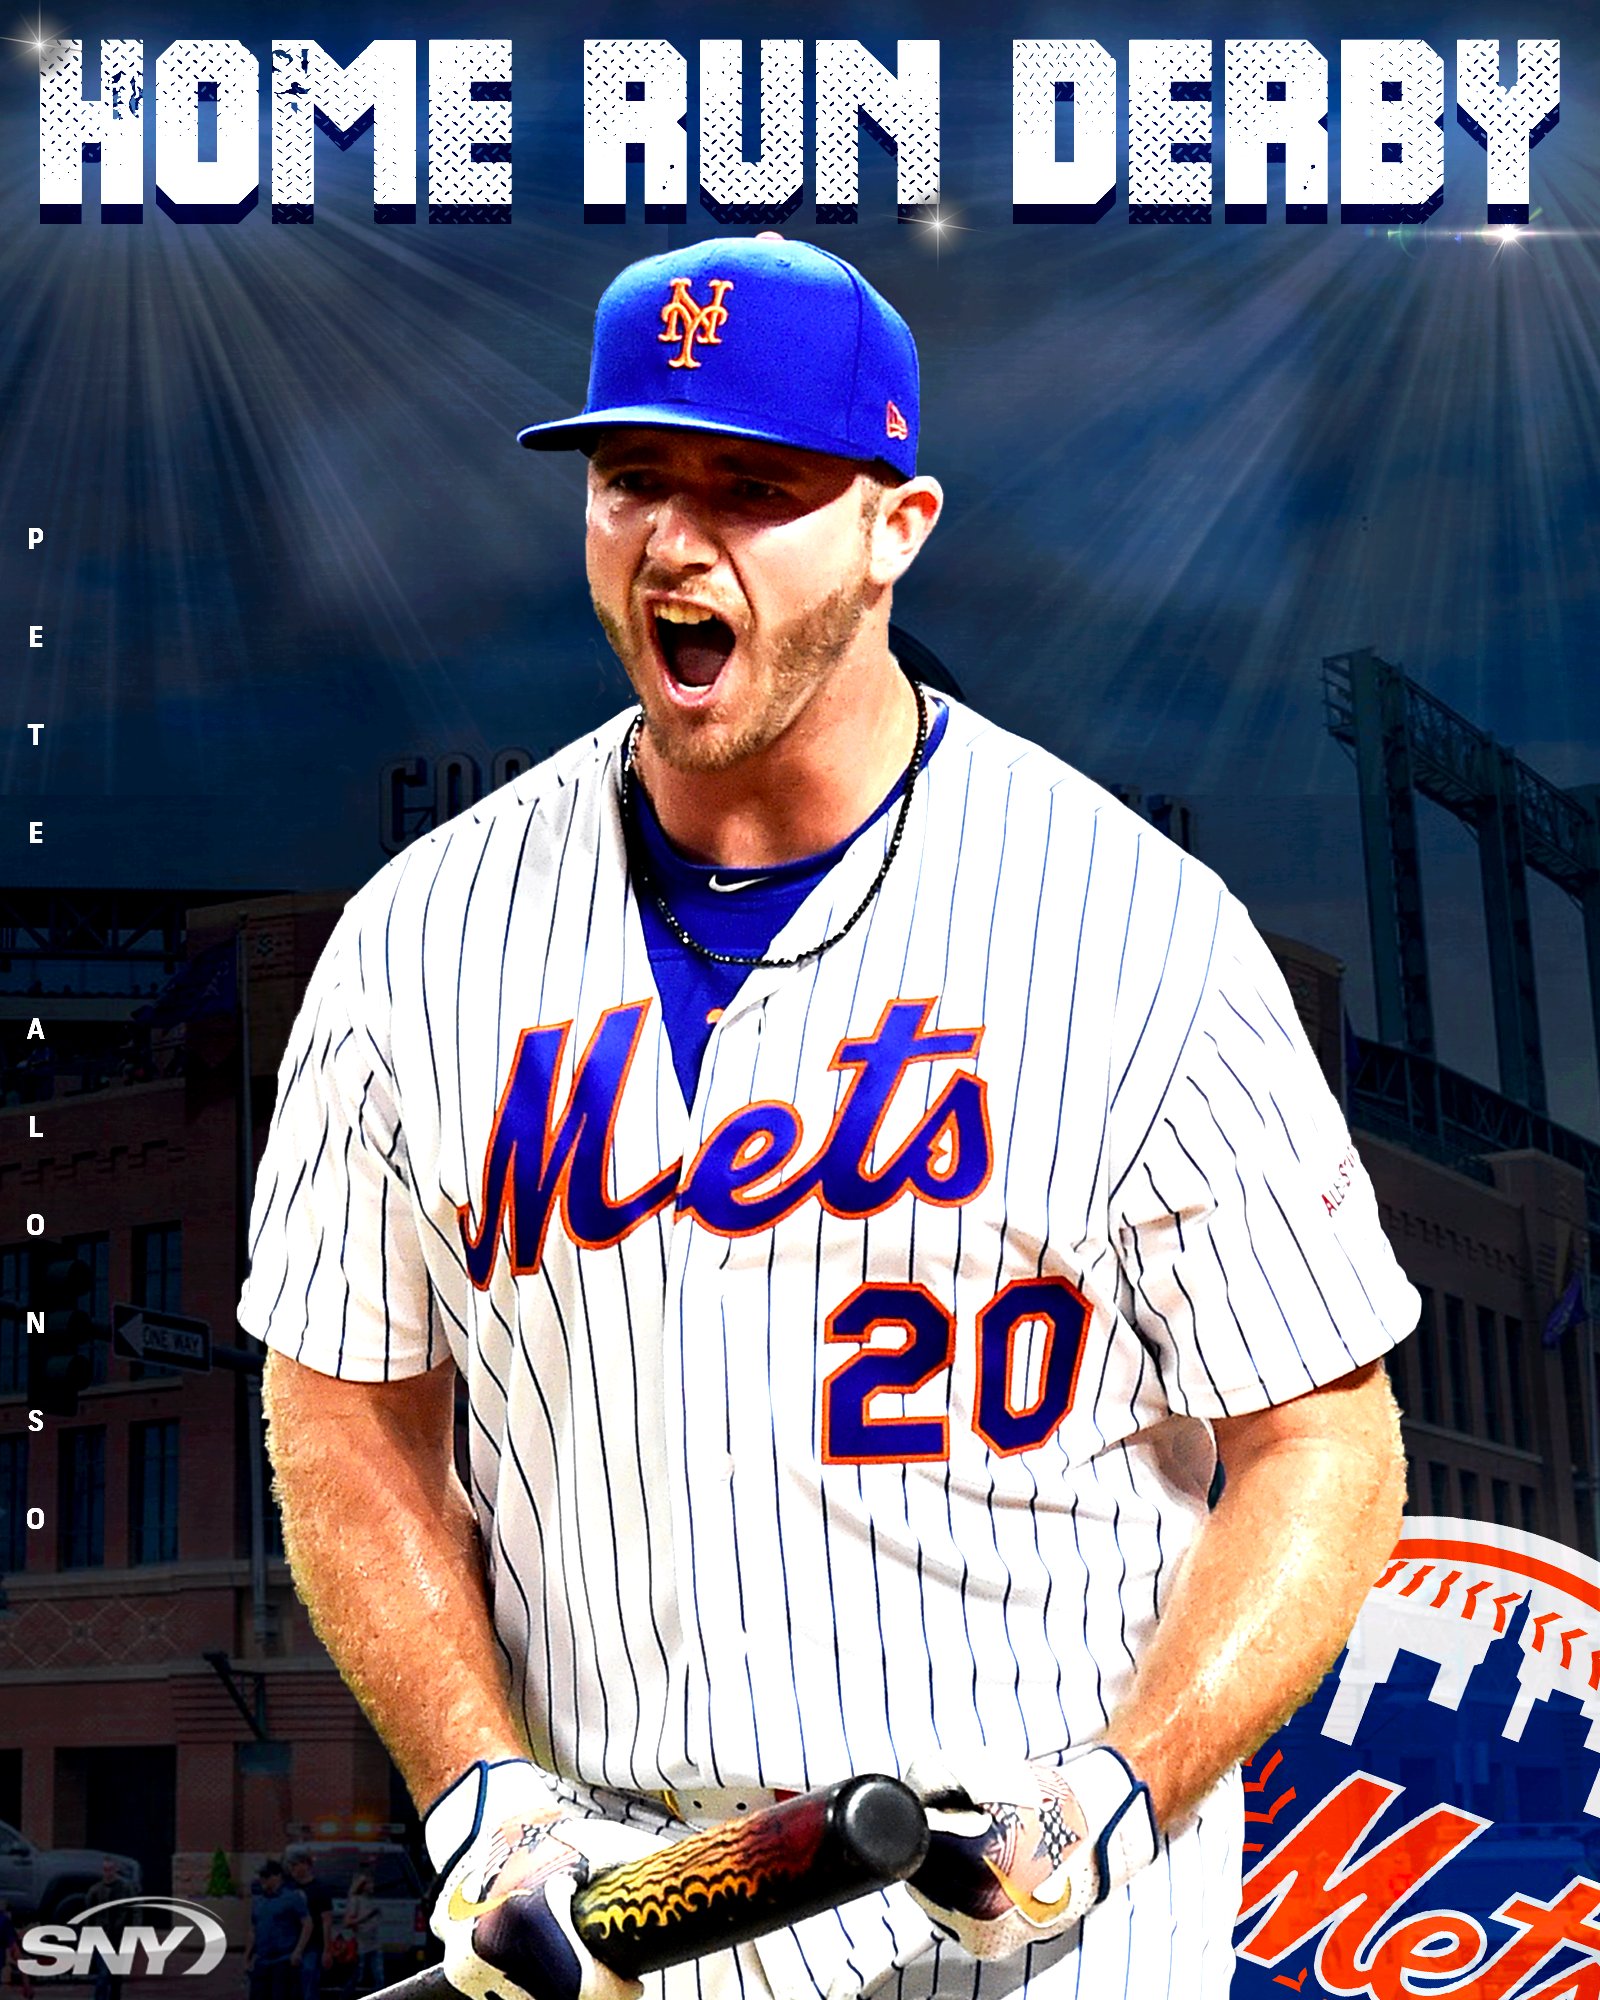 TONIGHT - Pete Alonso defends his title of Home Run King in the